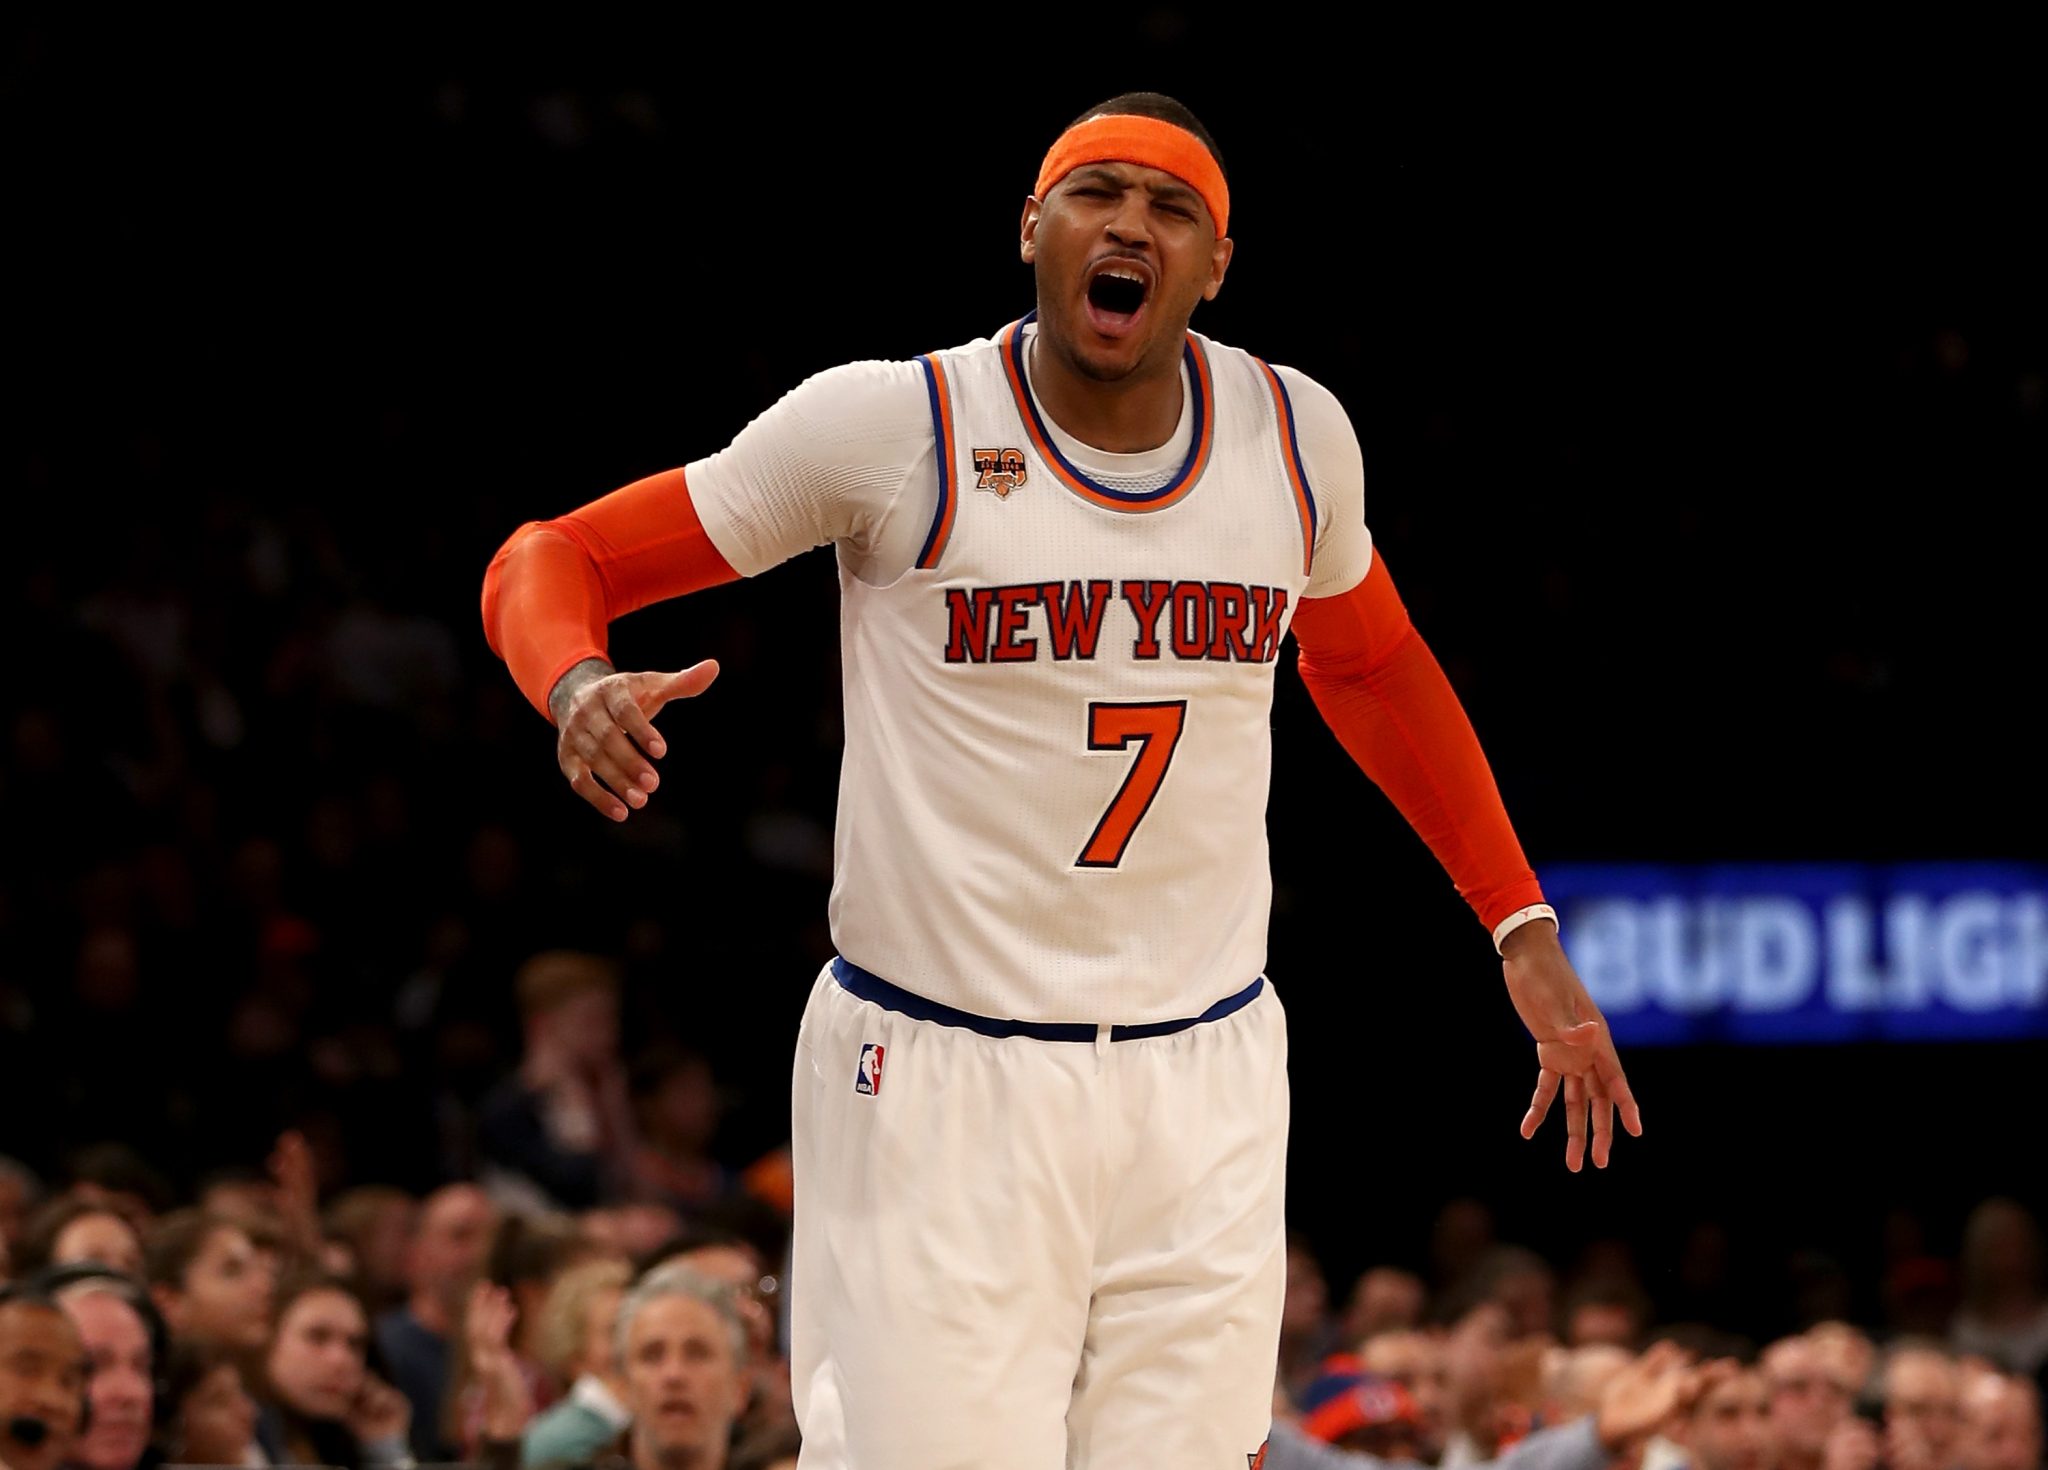 NEW YORK, NY - FEBRUARY 12: Carmelo Anthony #7 of the New York Knicks reacts after he is called for a foul in the fourth quarter against the San Antonio Spurs at Madison Square Garden on February 12, 2017 in New York City. NOTE TO USER: User expressly acknowledges and agrees that, by downloading and or using this Photograph, user is consenting to the terms and conditions of the Getty Images License Agreement   Elsa/Getty Images/AFP